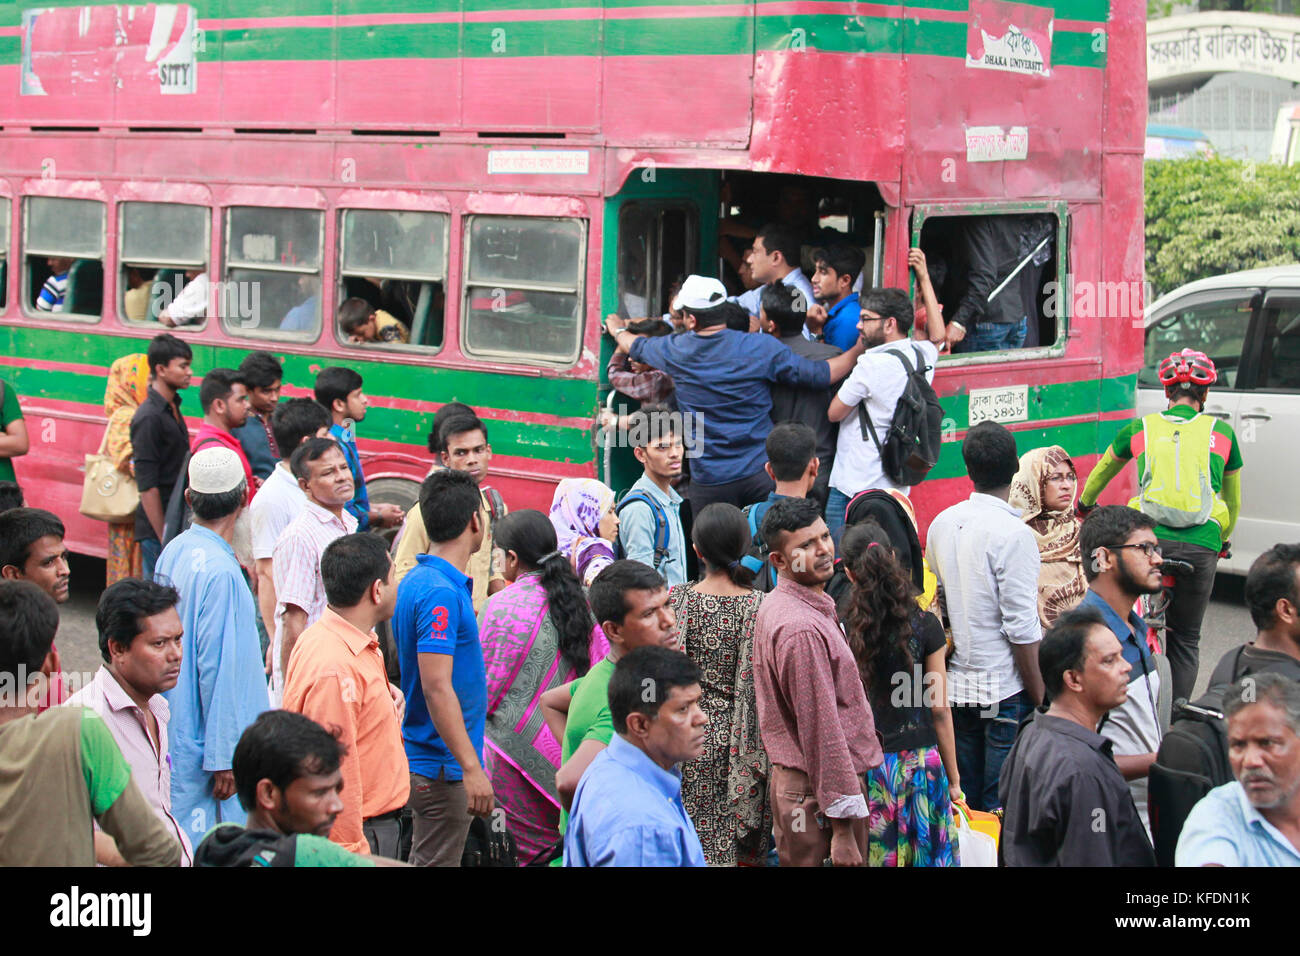 Bangladeshi people try to ride in of an overcrowded bus to travel home, as others wait for transport ahead of Iftar, in Dhaka, Bangladesh Stock Photo